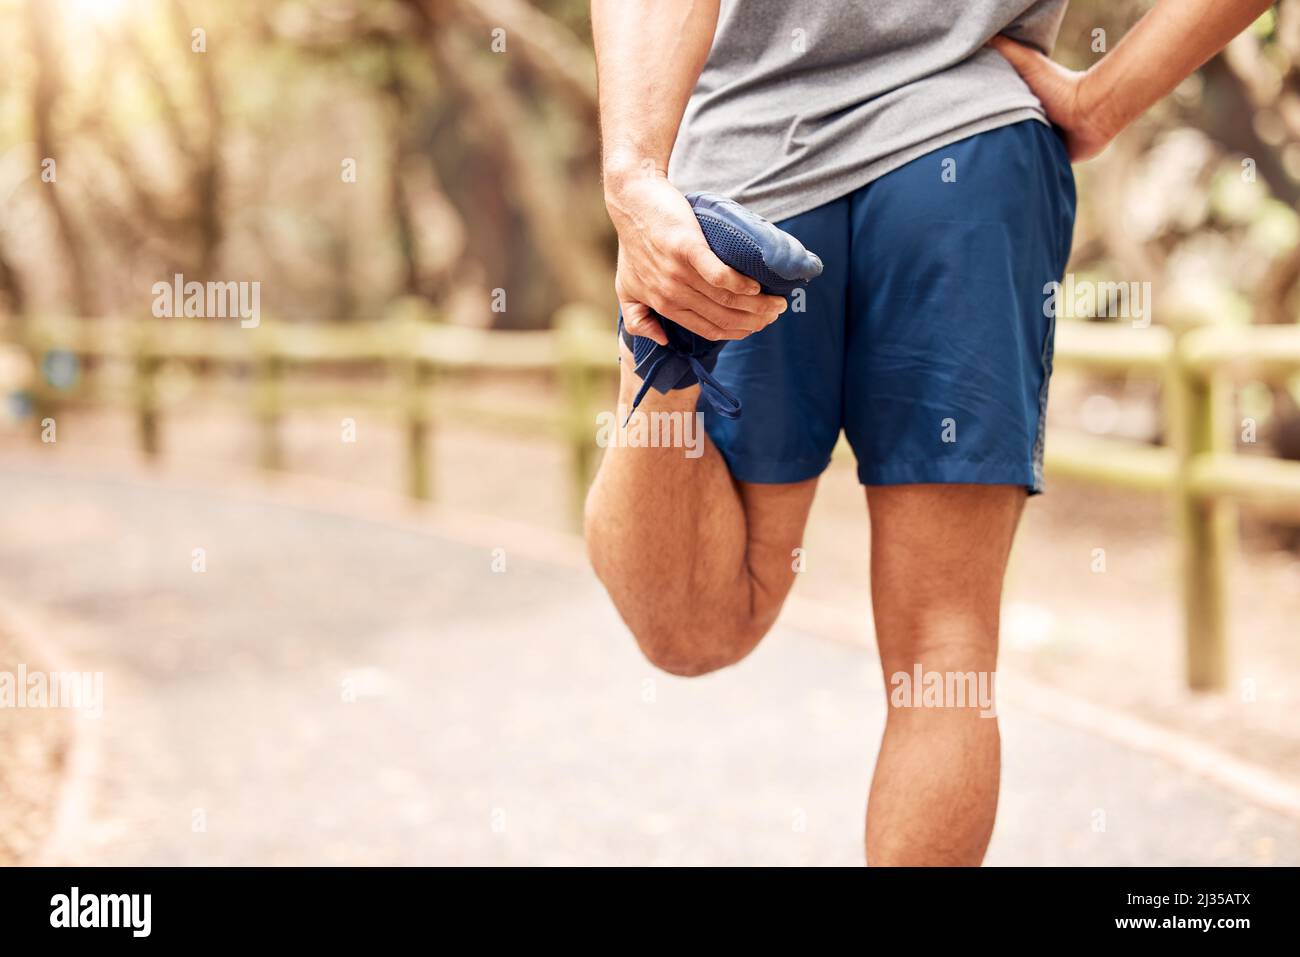 Exercising is safer with a warmup. Shot of an unrecognisable man stretching before her workout in nature. Stock Photo